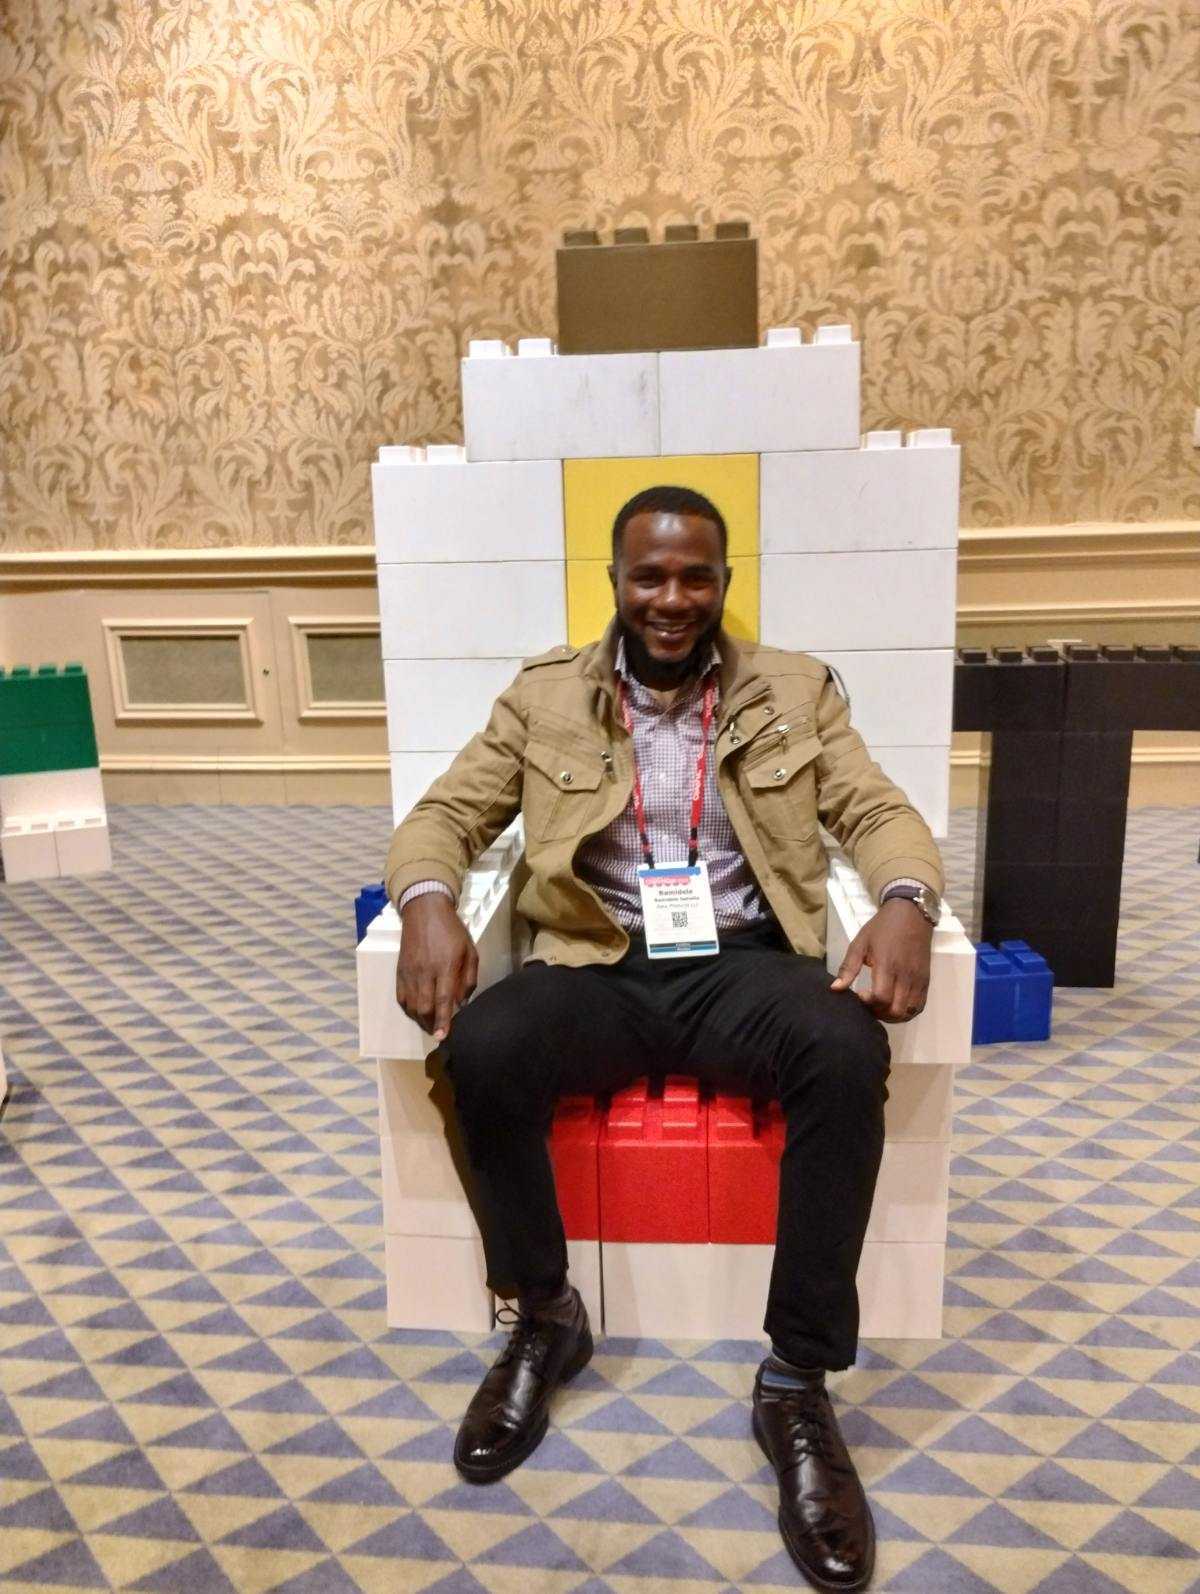 Bamidele Ismaila at ChannelCon Throne out of Legos